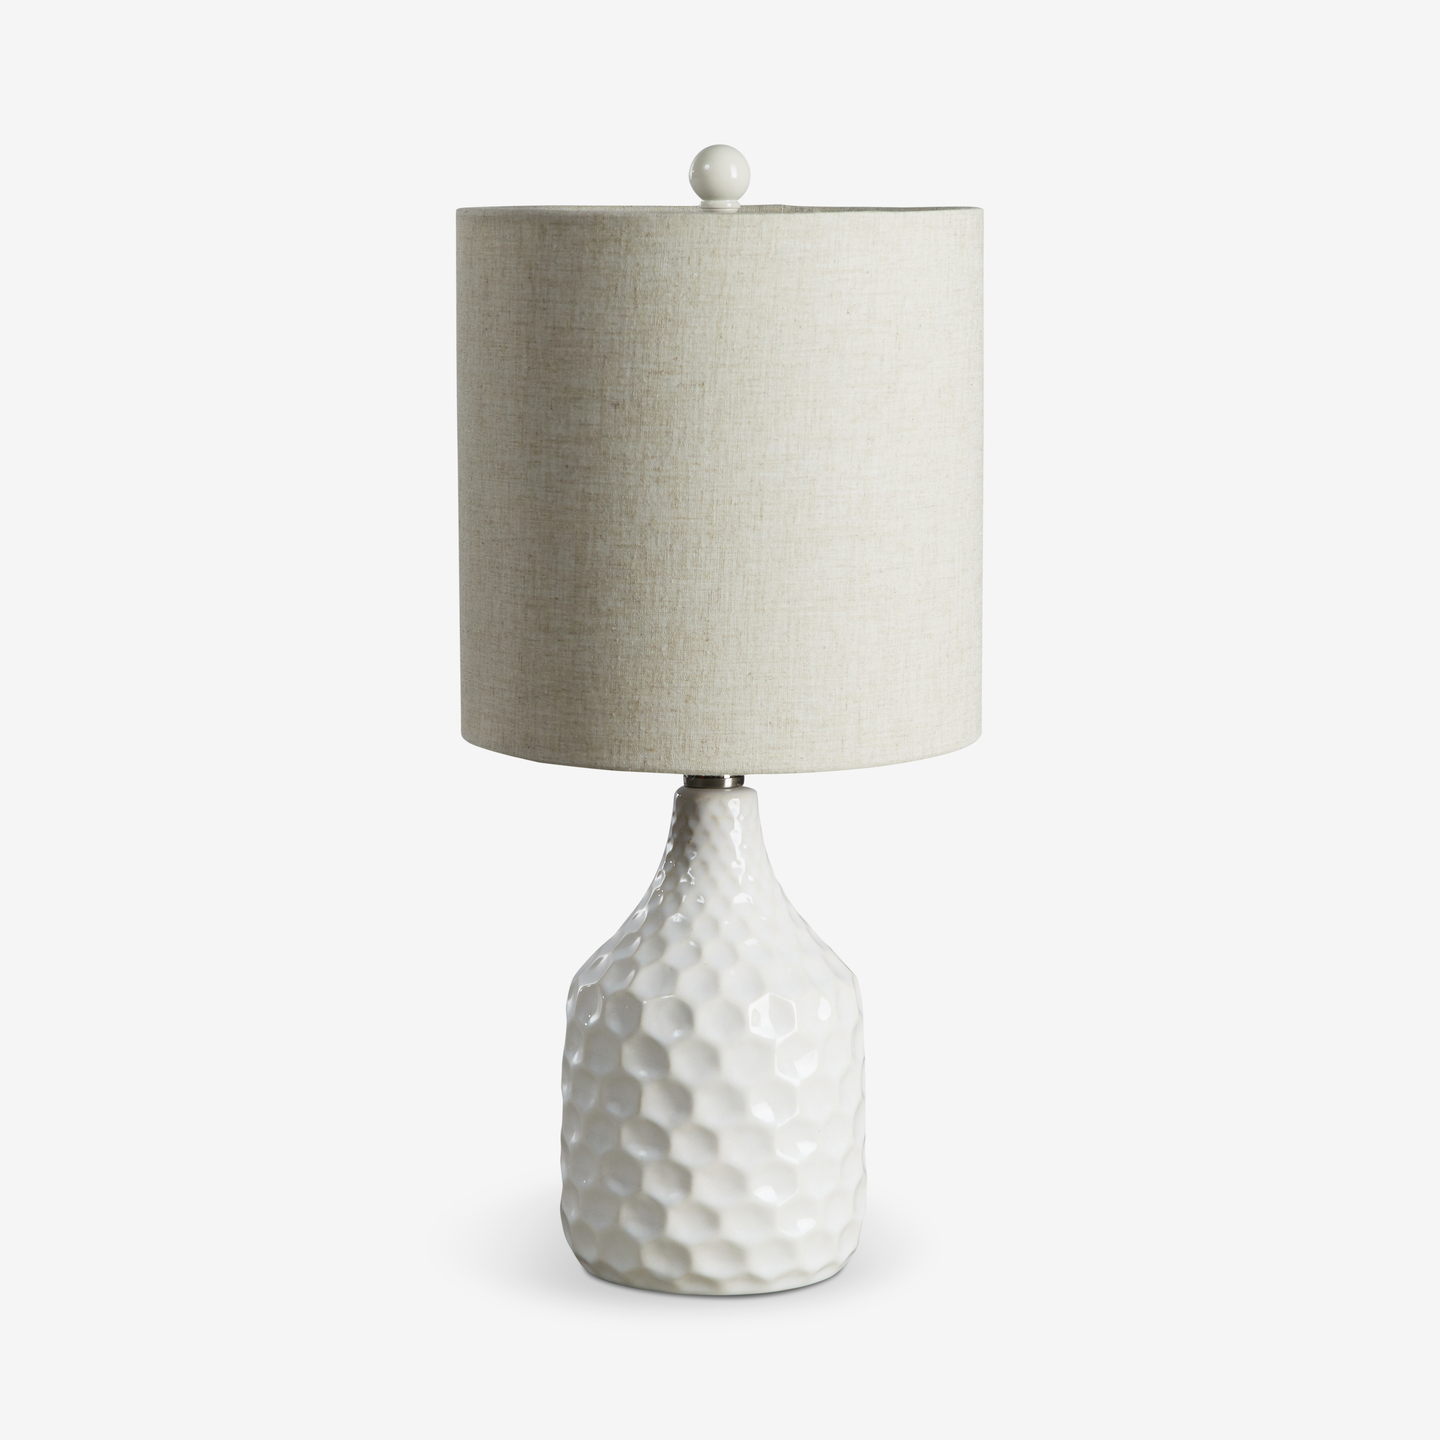 692_Blakely-19in-White-Table-Lamp_Front_Mid-Century_Bedroom-8 2020